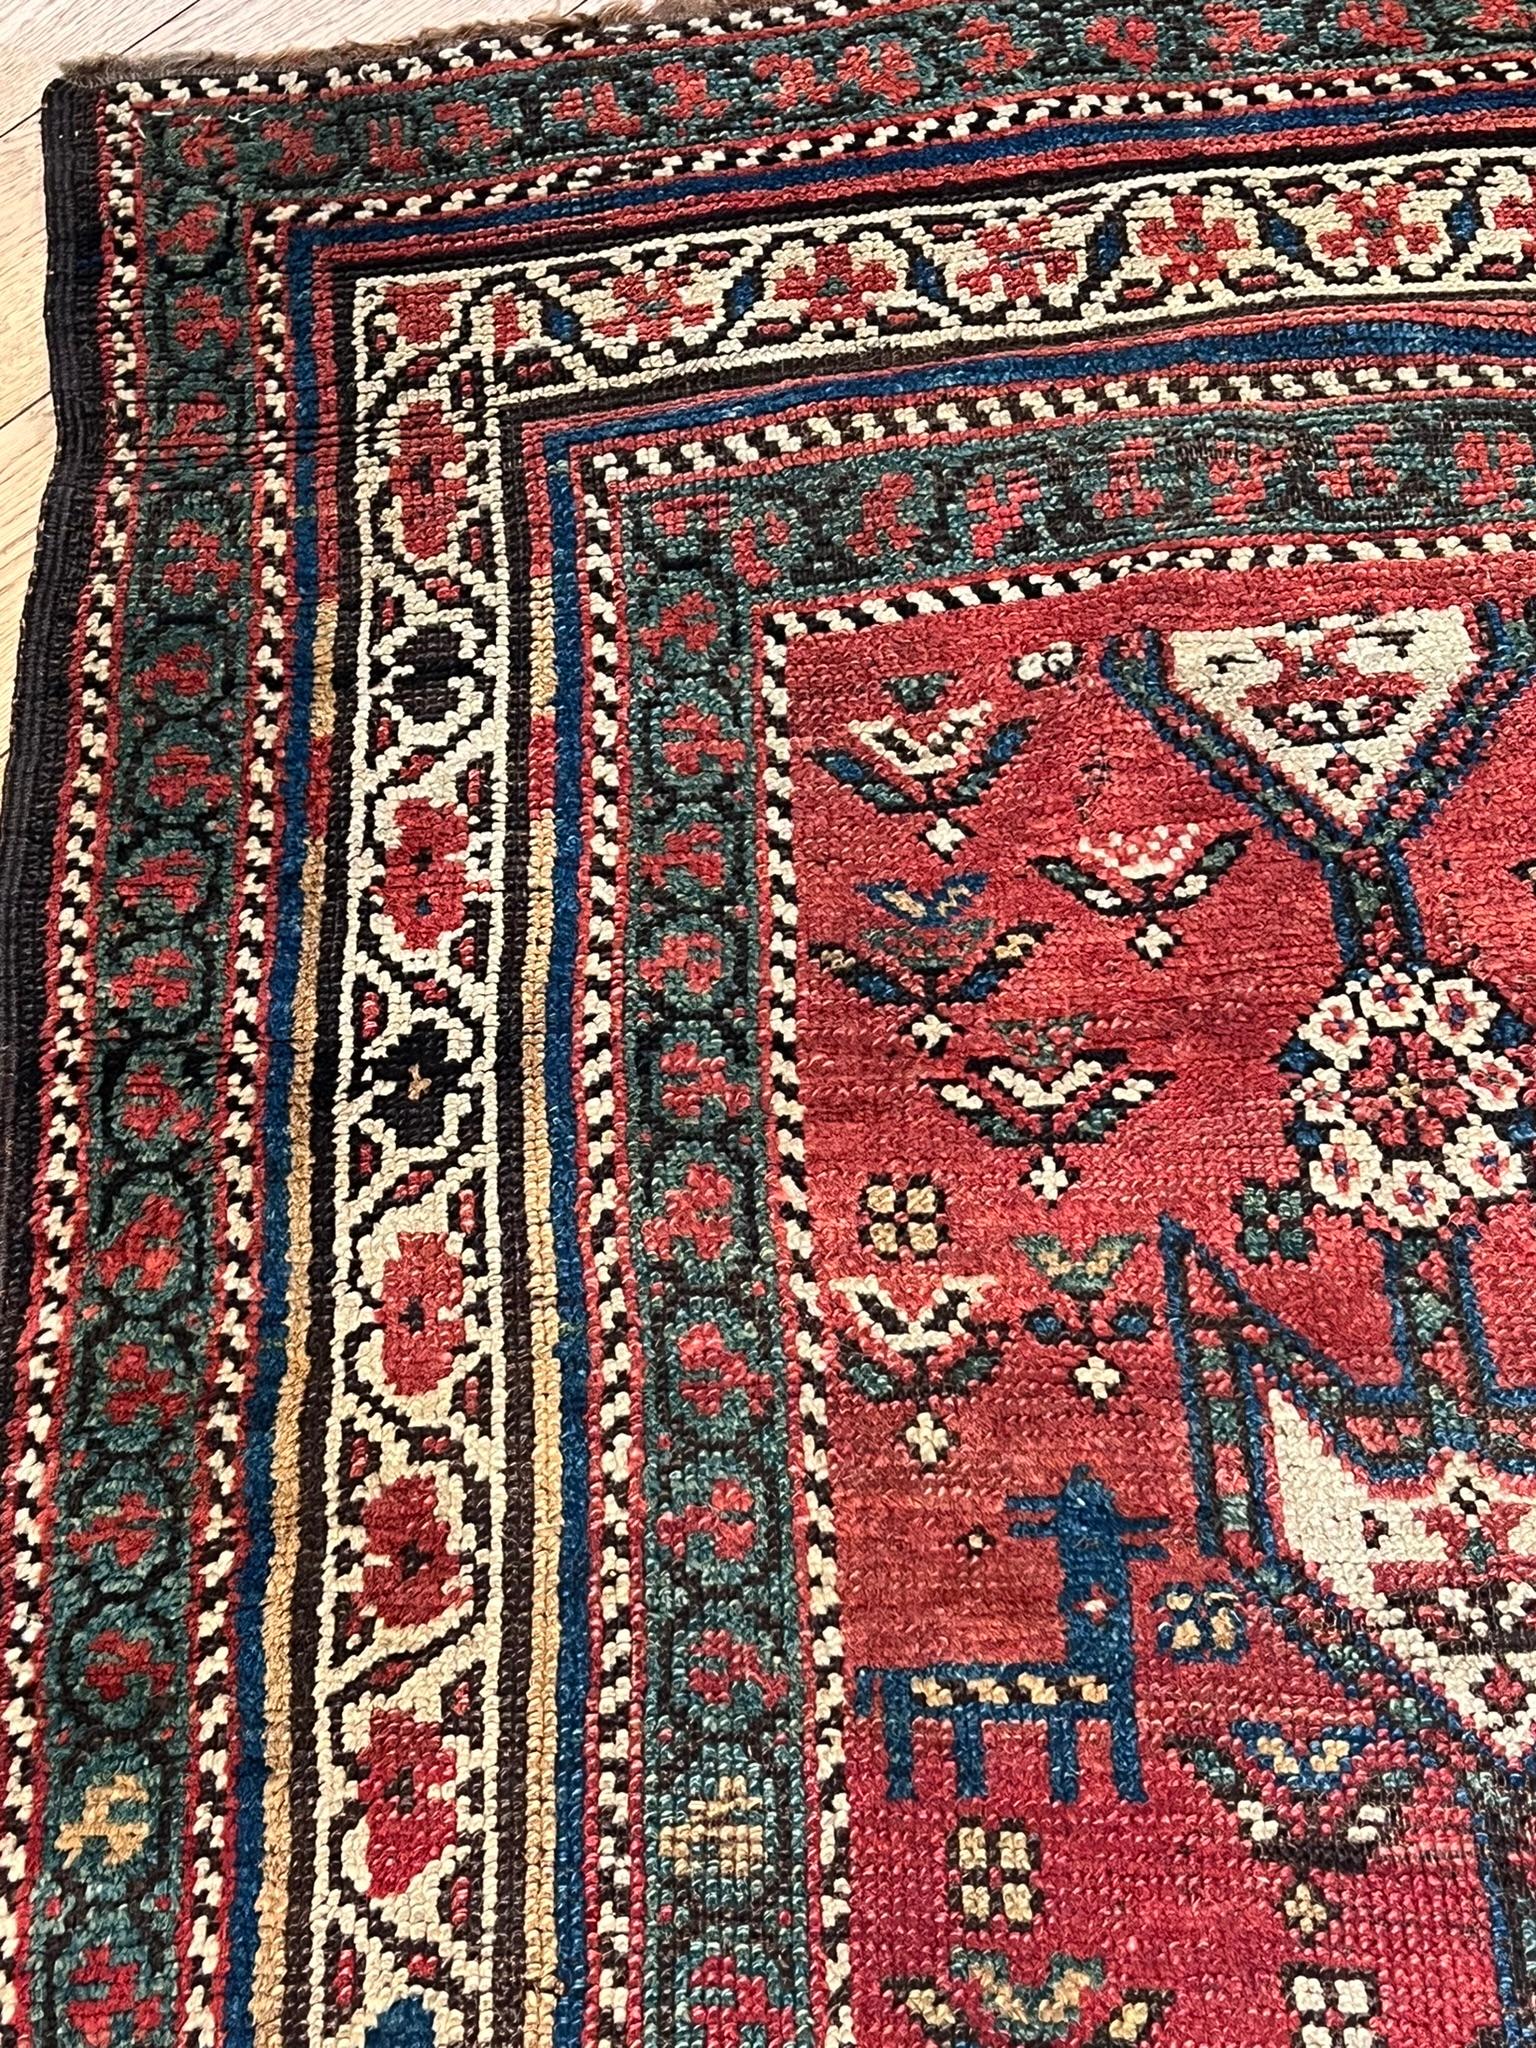 Azerbaijani Shahsavan tribal manufacture carpet with red background and zoomorphic motifs For Sale